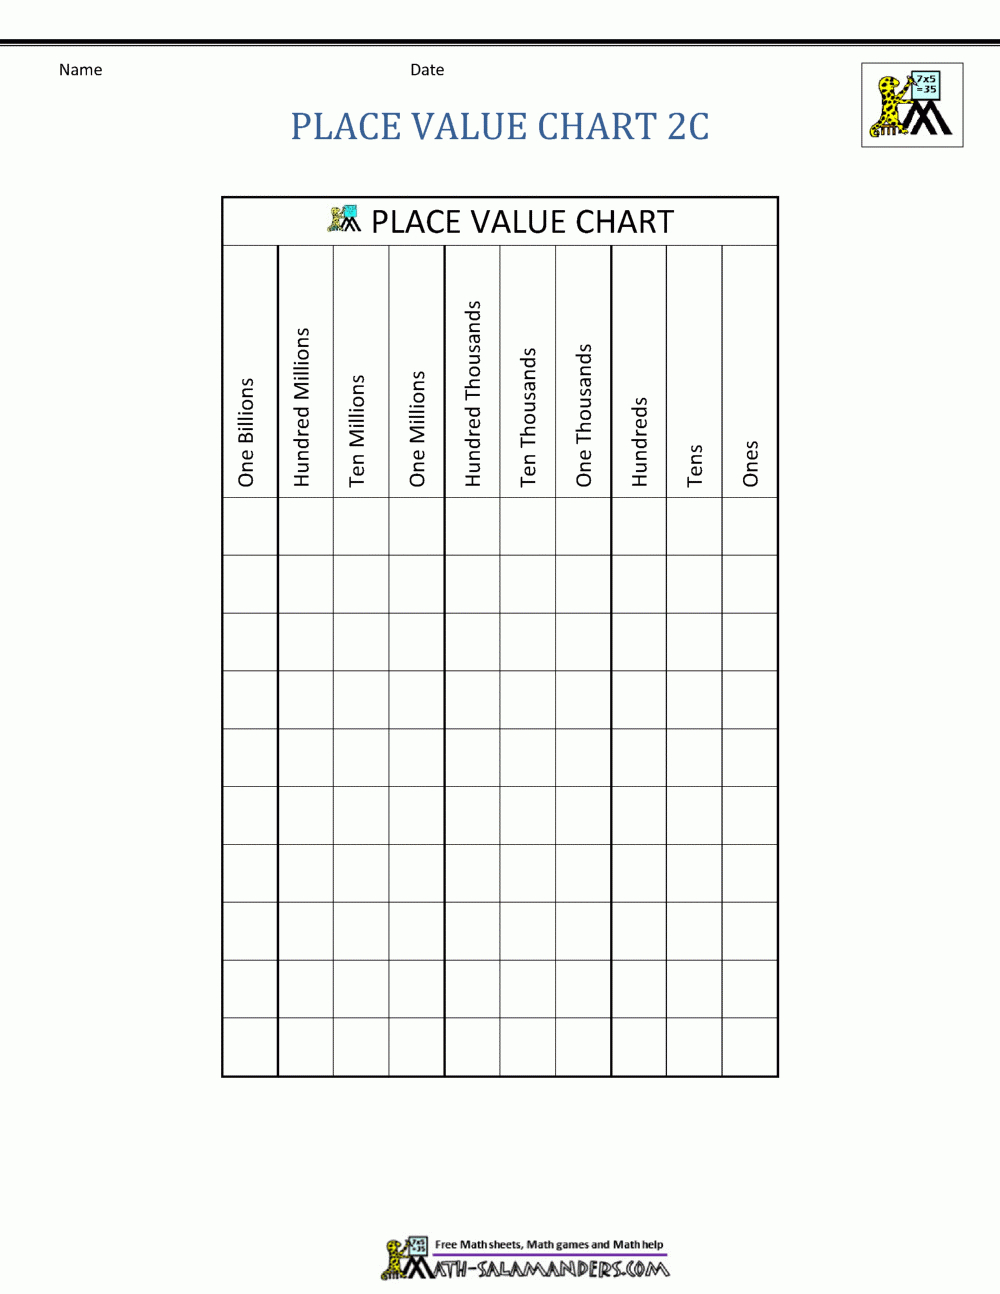 decimal-place-value-chart-free-printable-place-value-chart-in-spanish